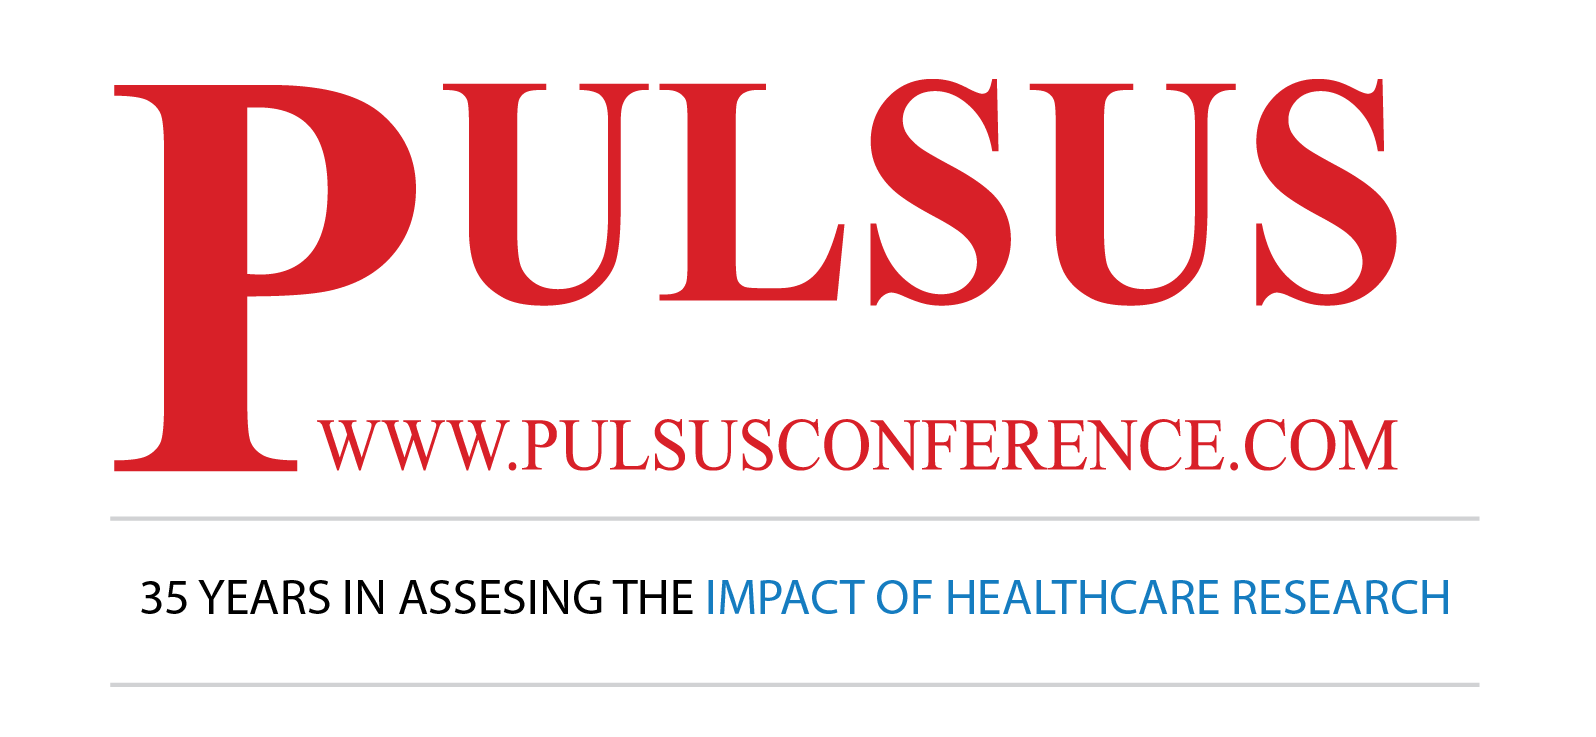 Pulsus Conference